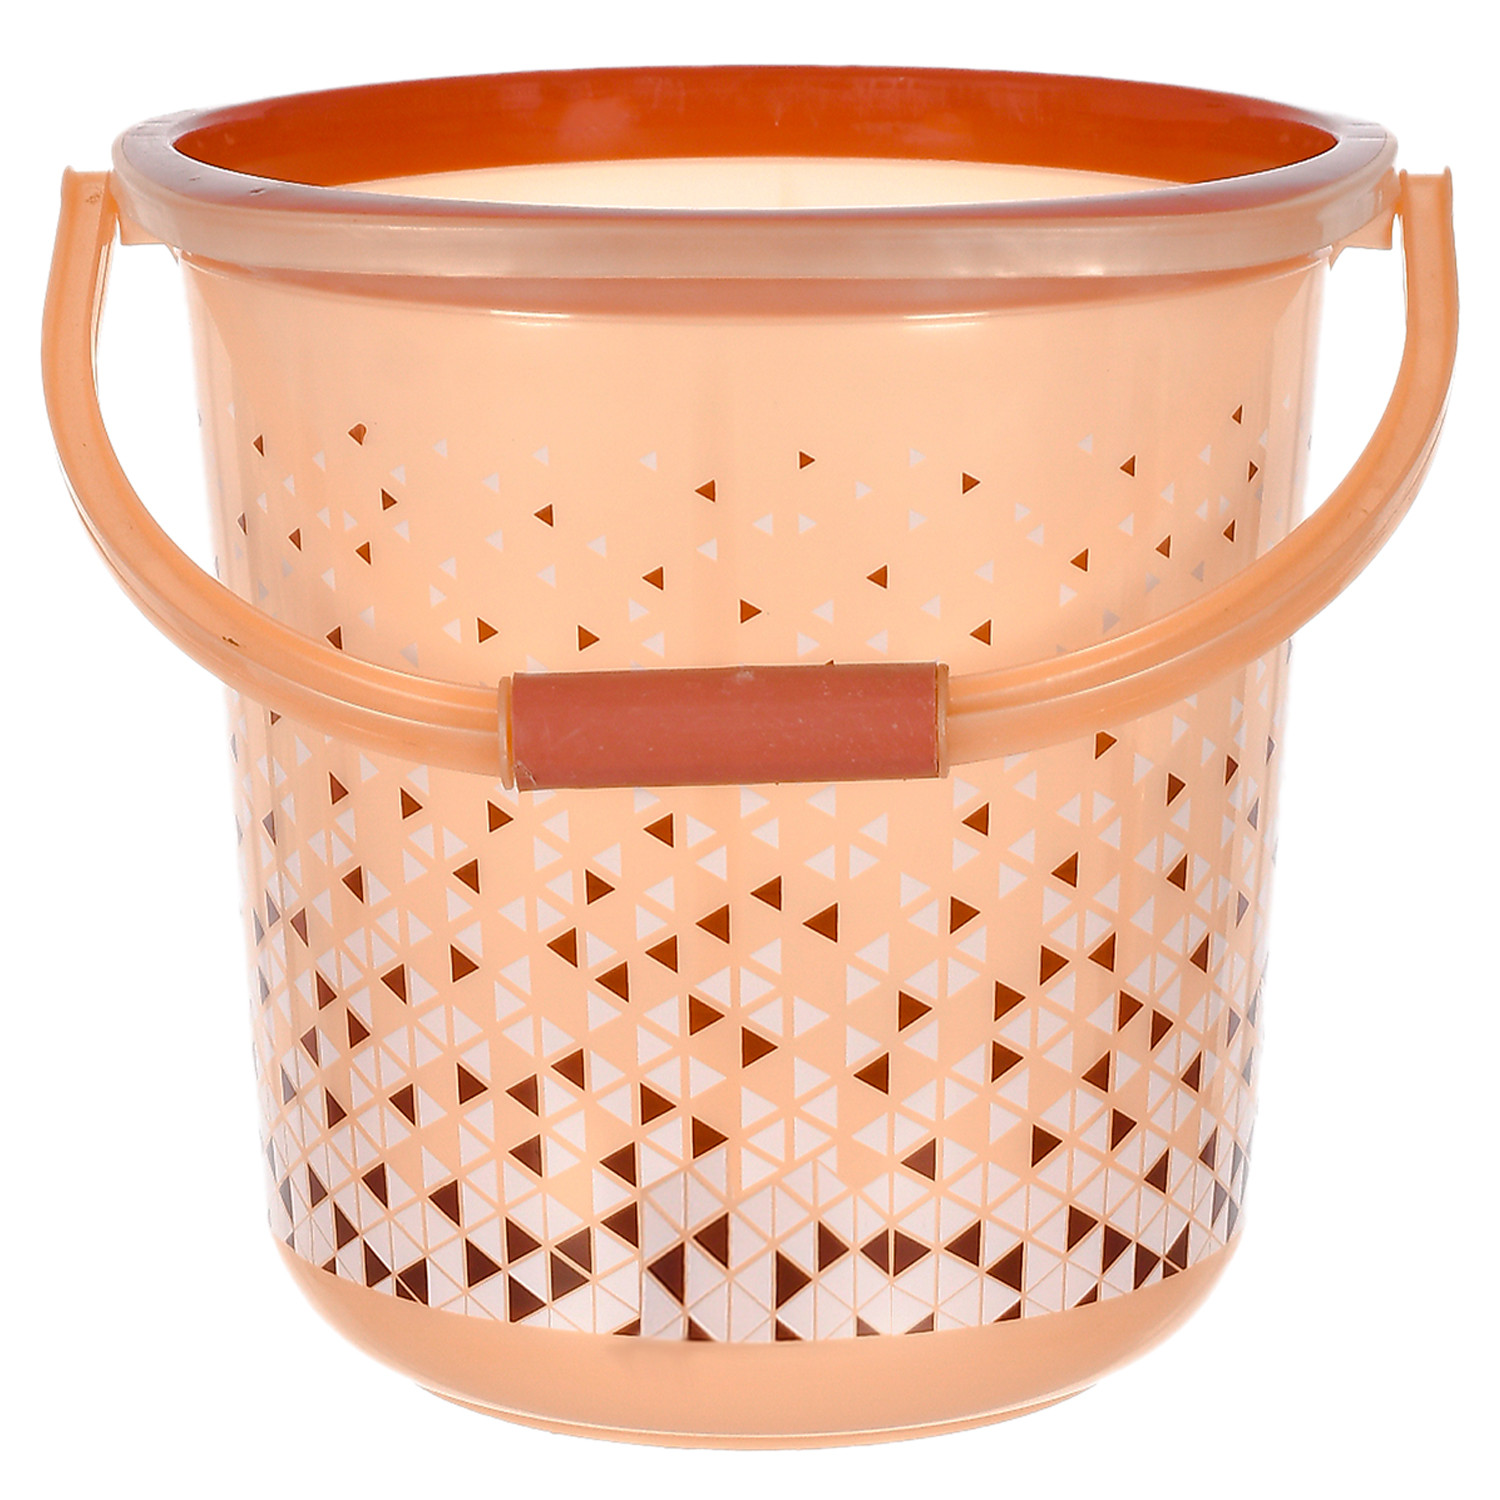 Kuber Industries Multiuses Tinted Print Plastic Bucket With Handle, 18 litre (Brown)-46KM0337